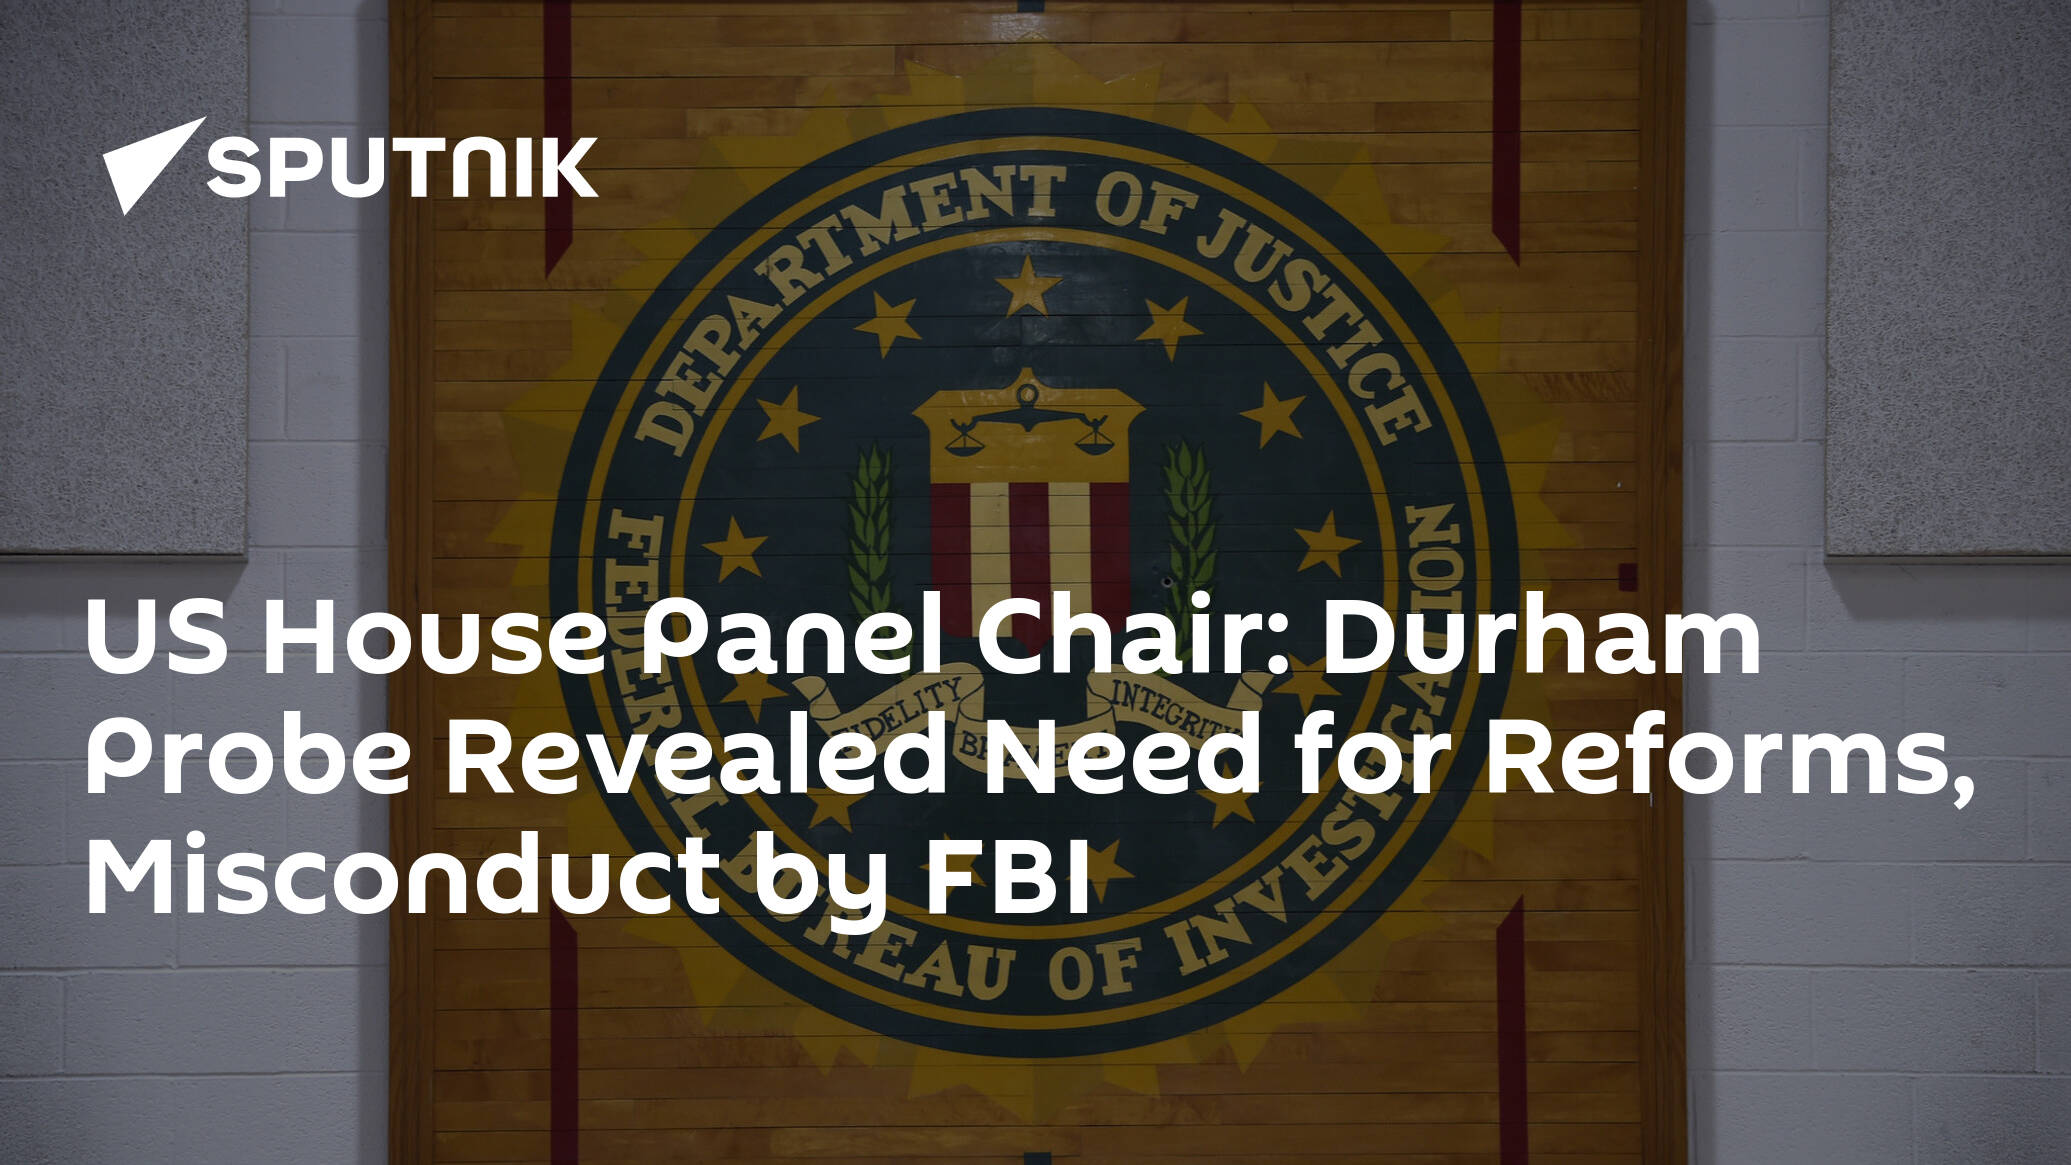 US House Panel Chair: Durham Probe Revealed Need for Reforms, Misconduct by FBI